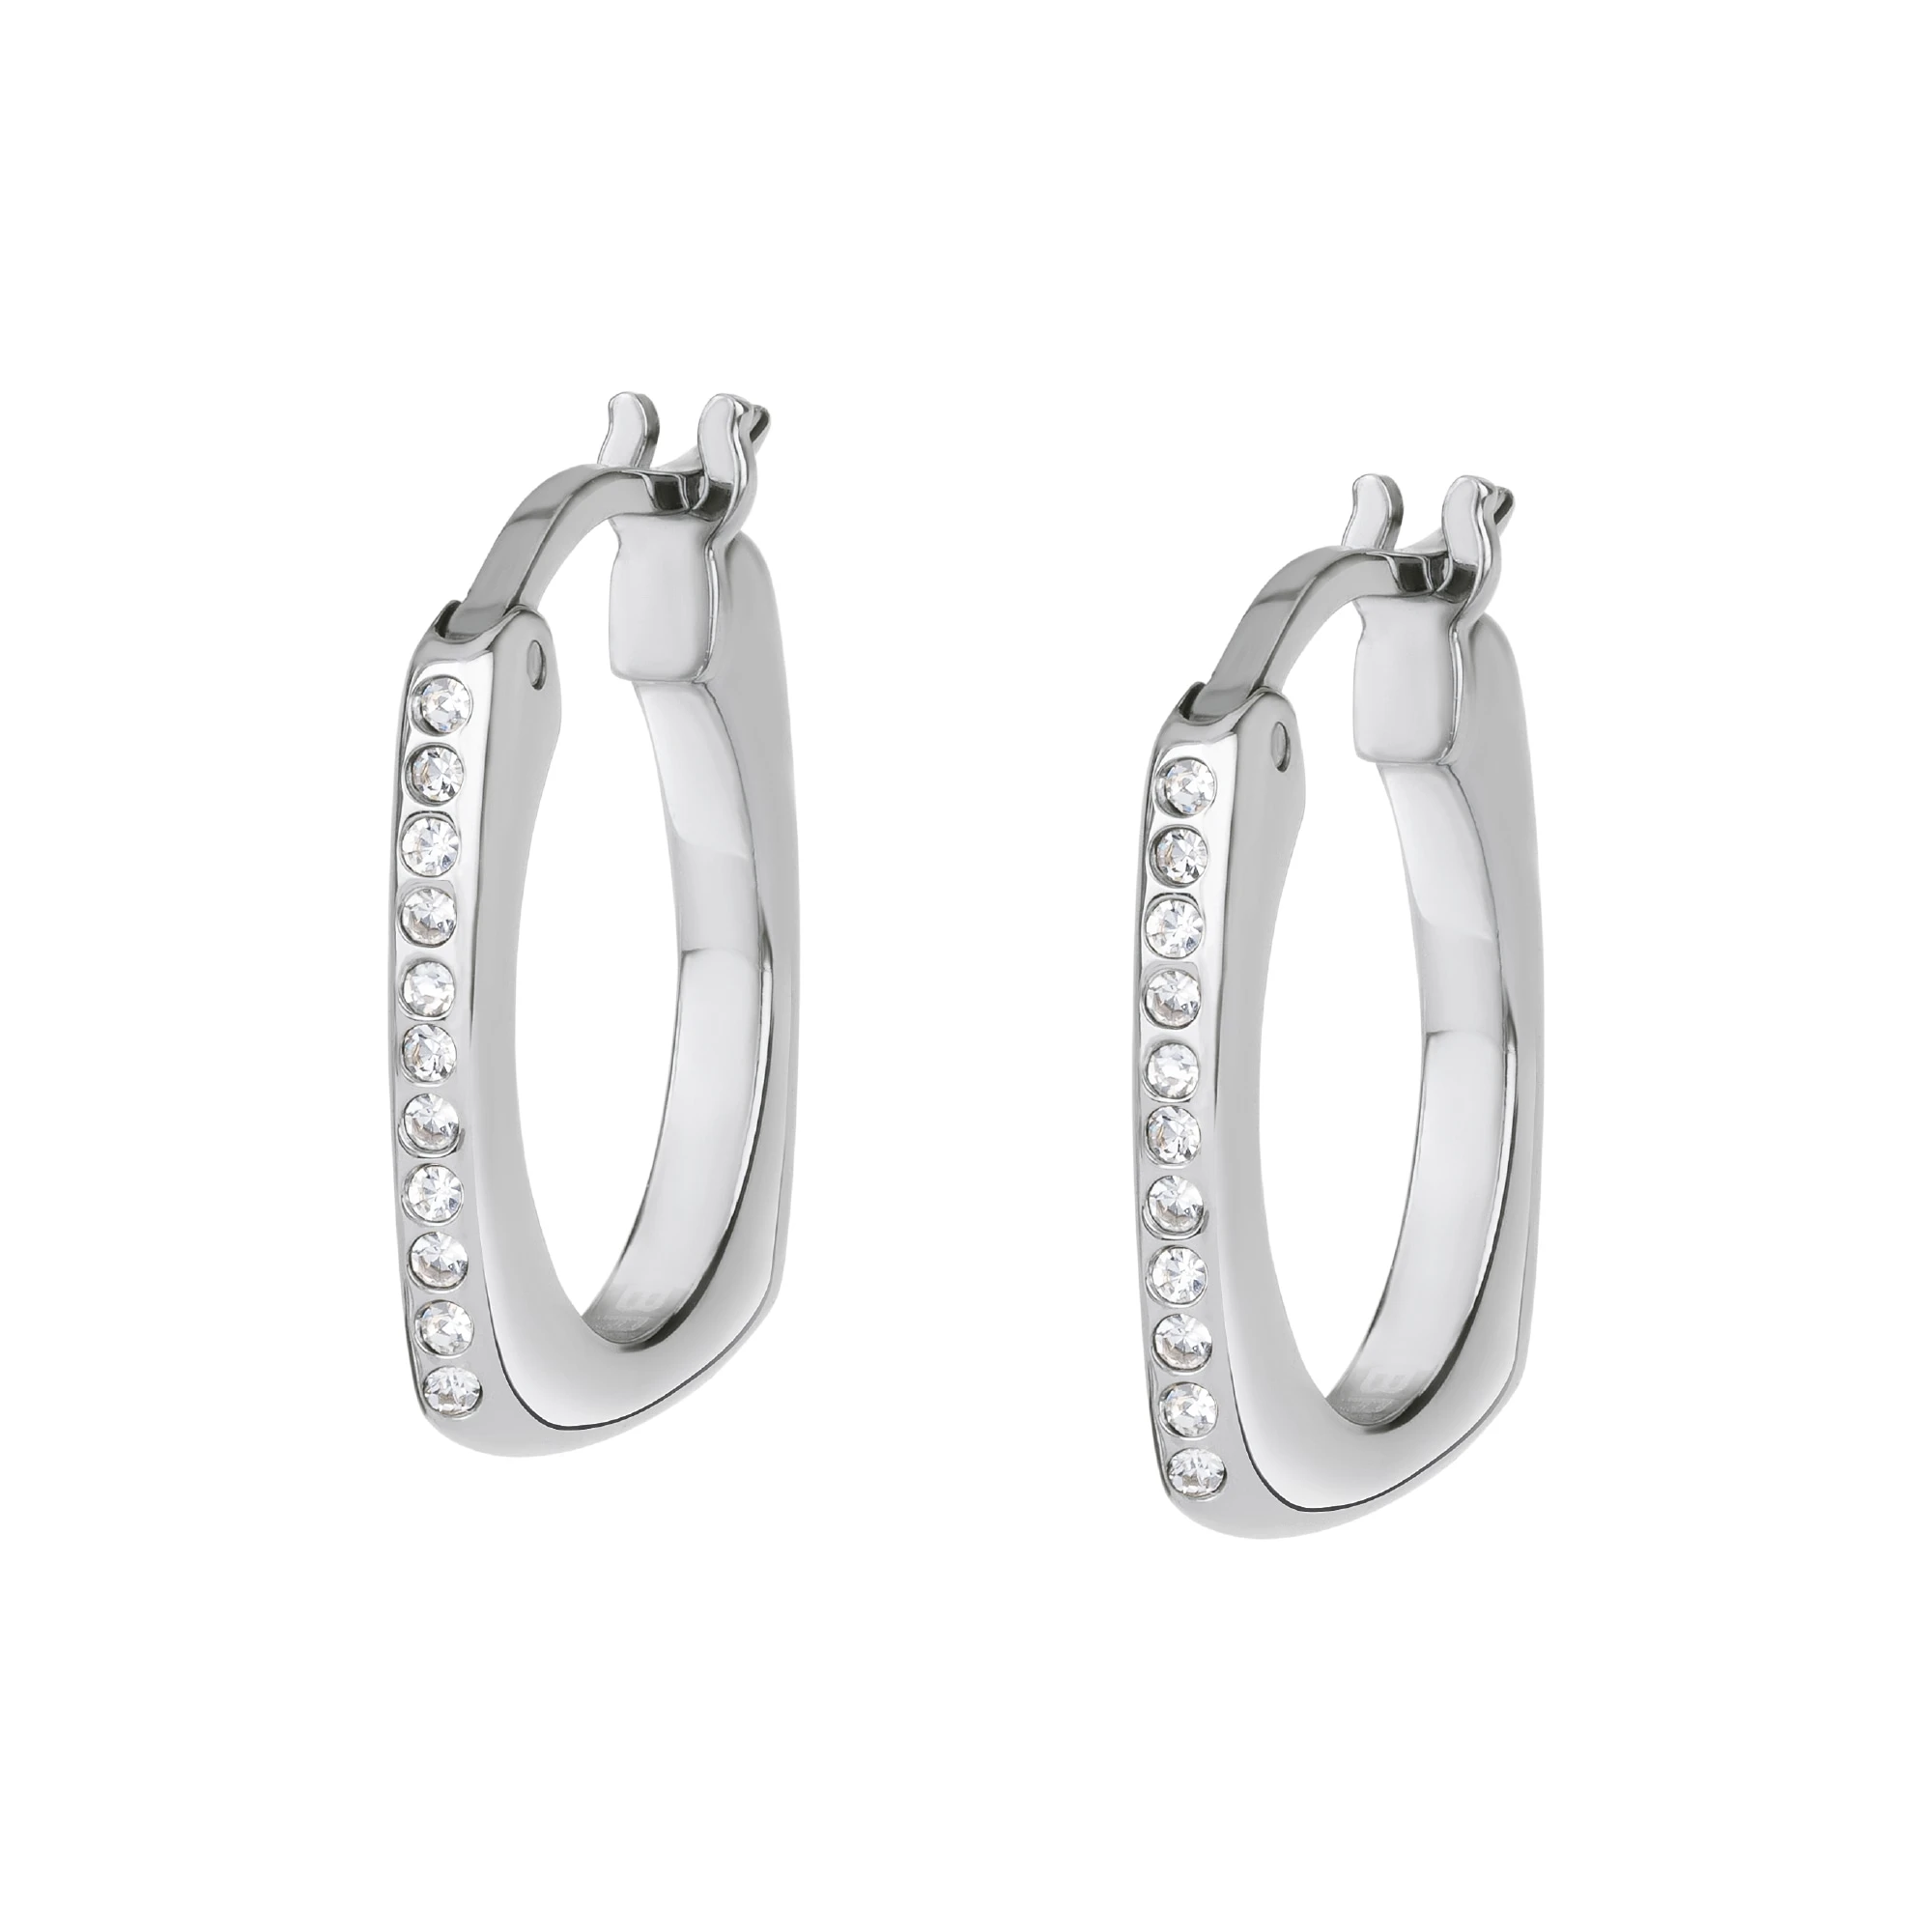 NEW TETRA - STAINLESS STEEL EARRINGS WITH CRYSTALS - 1 - TJ3157 | Breil